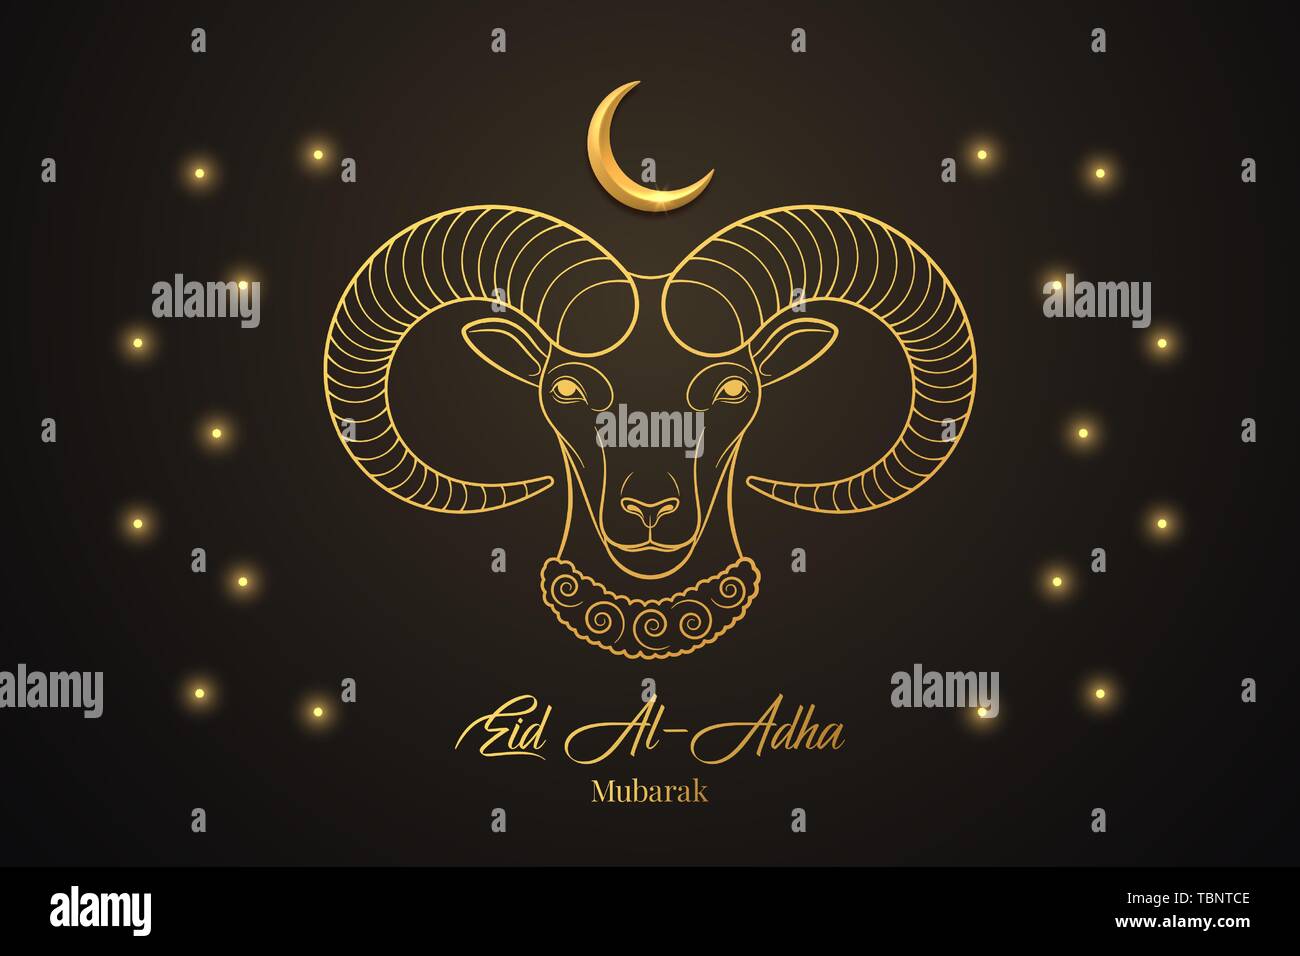 Eid Al Adha Mubarak Muslim Holiday The Feast Of Sacrifice With Golden Ram And Crescent On The Black Background Vector Illustration Graphic Design Stock Vector Image Art Alamy